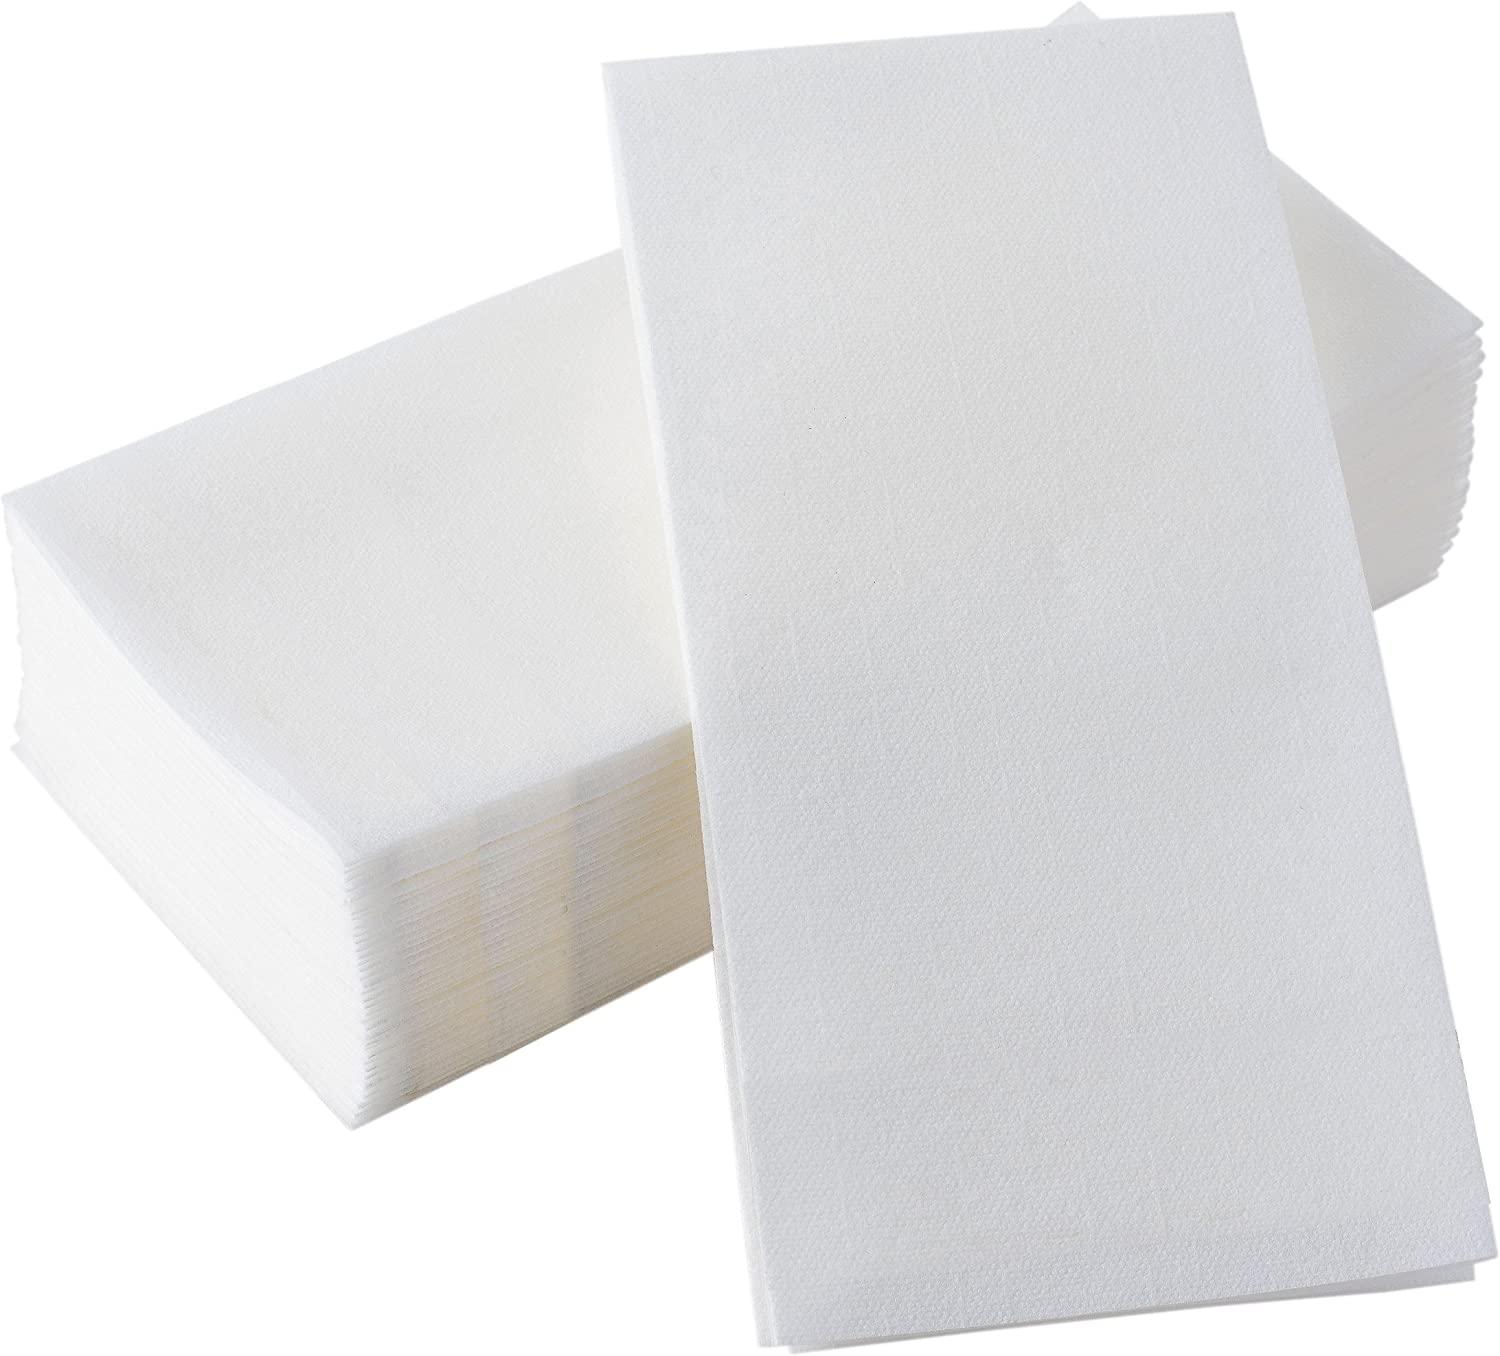 200 Count Disposable Guest Towel for Bathroom Paper Hand Towels